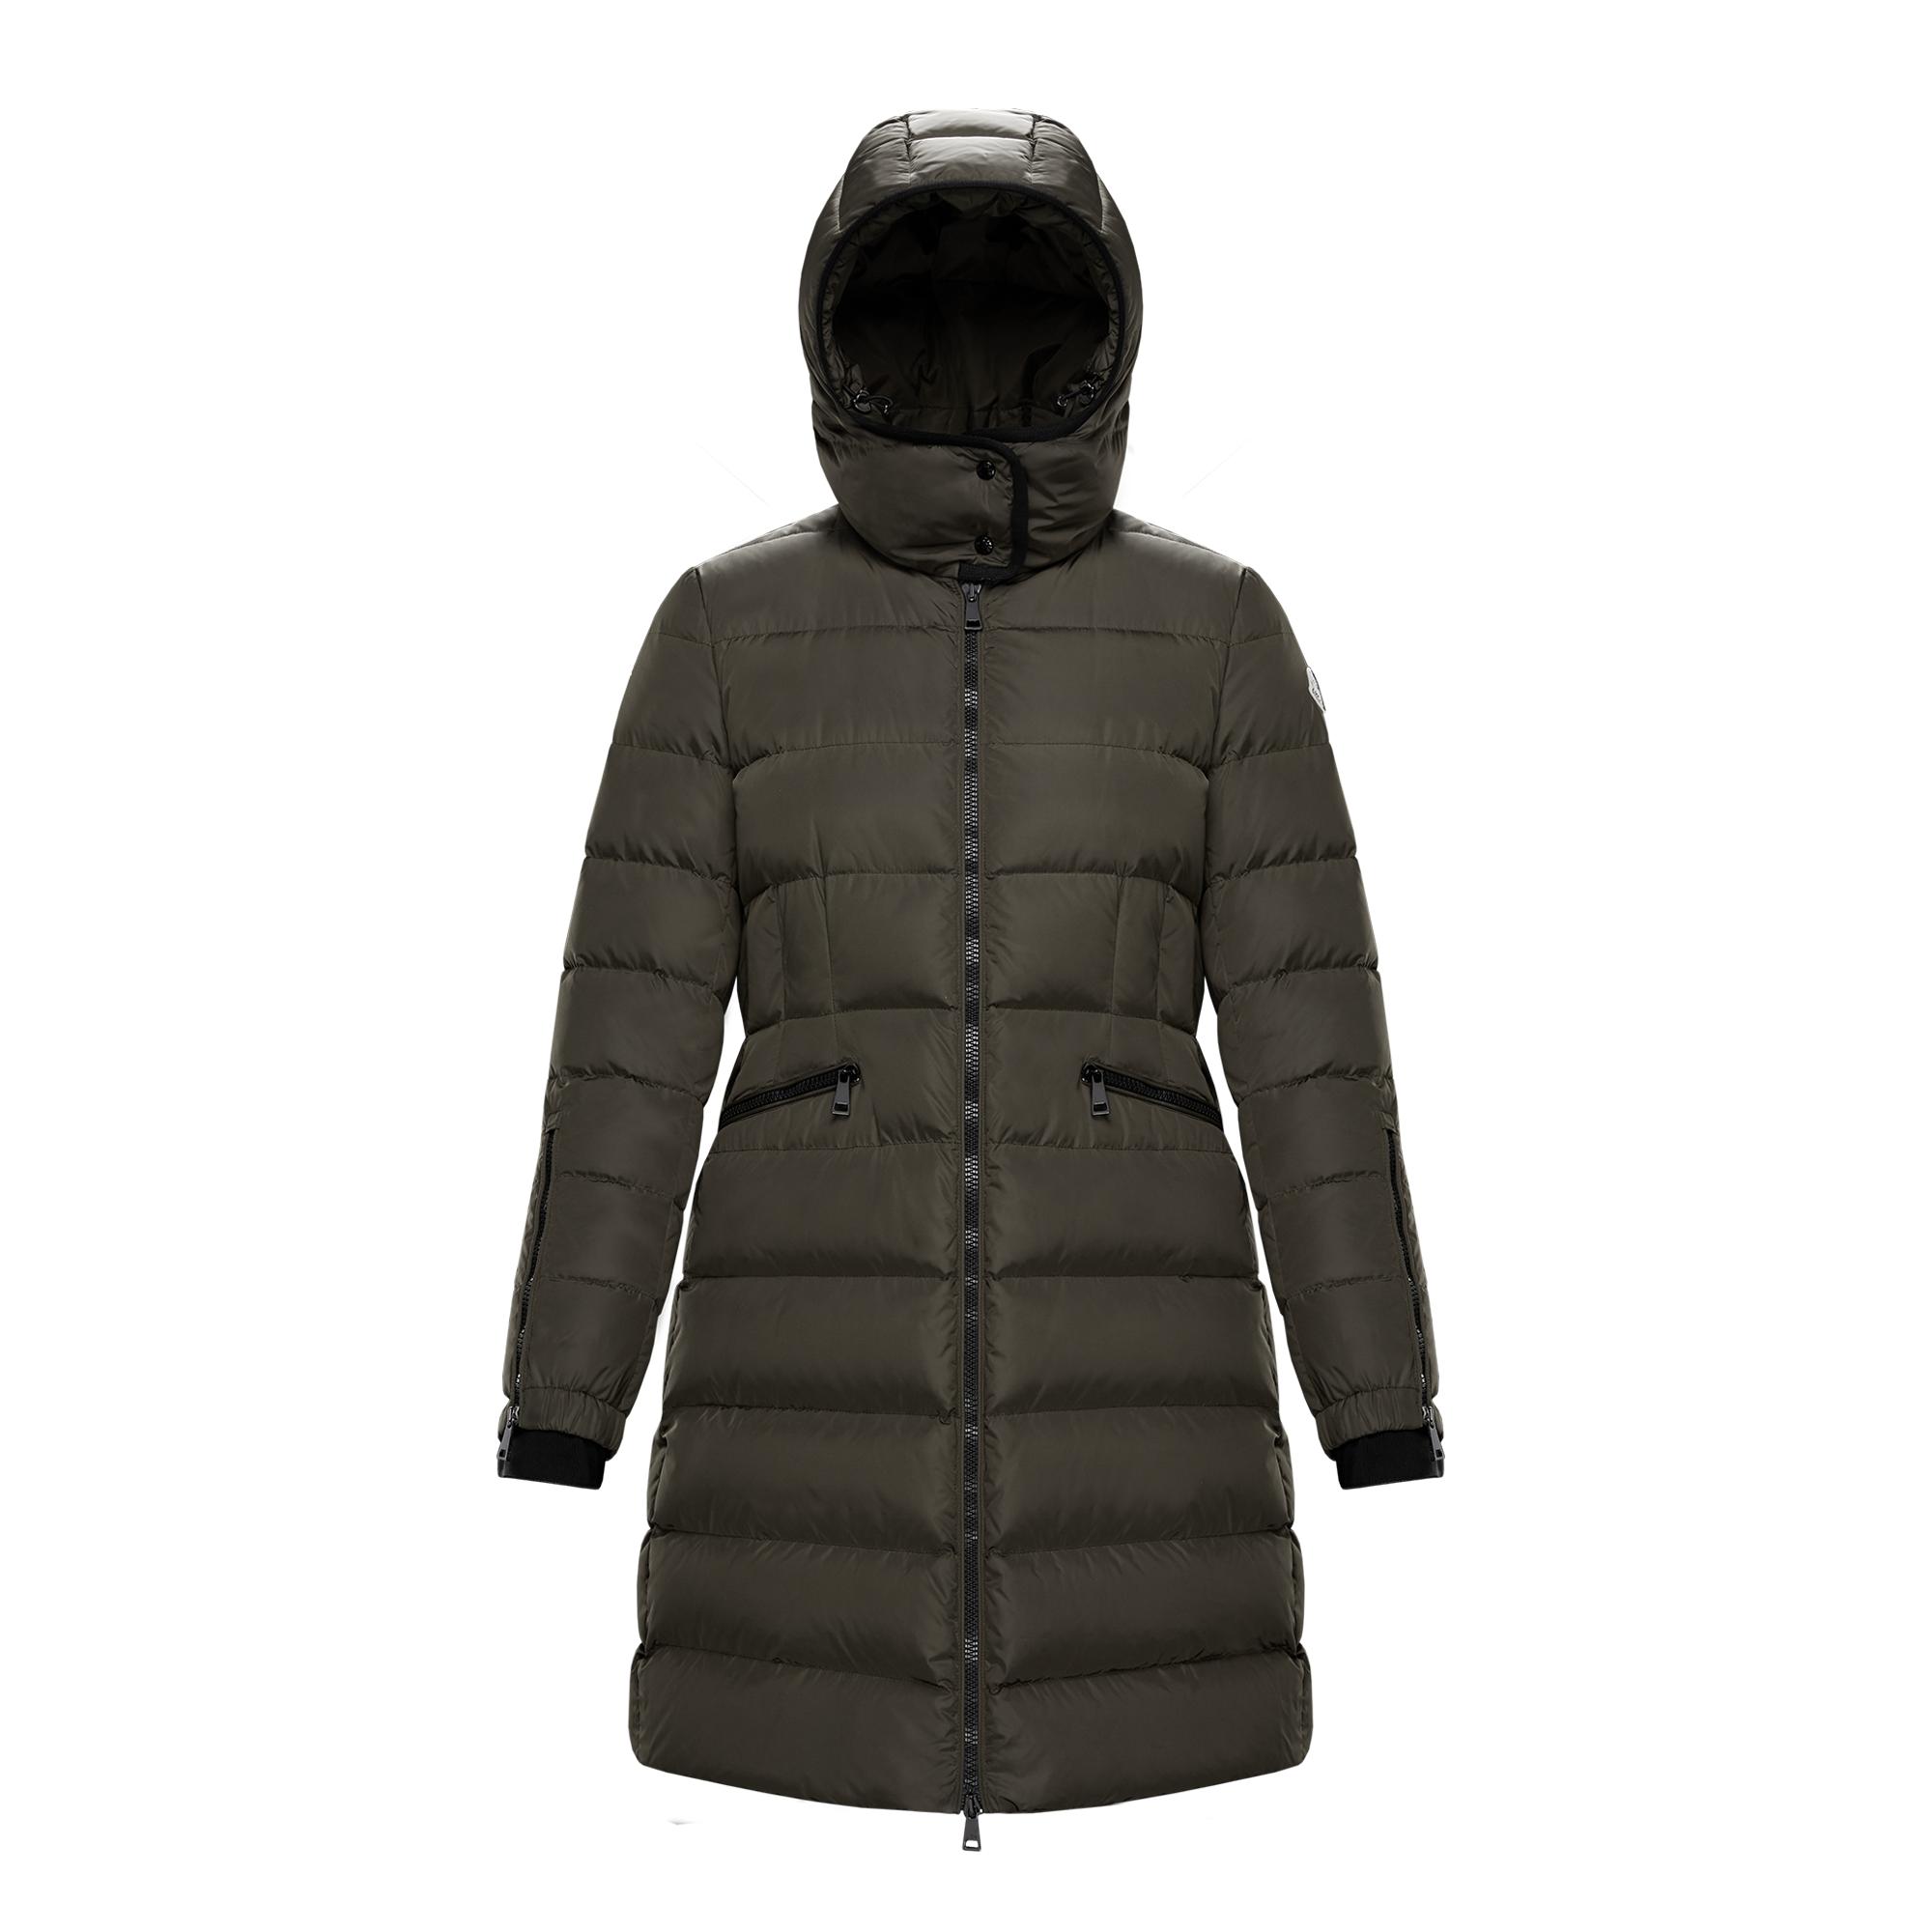 Moncler Synthetic Betulong in Military Green (Green) - Lyst